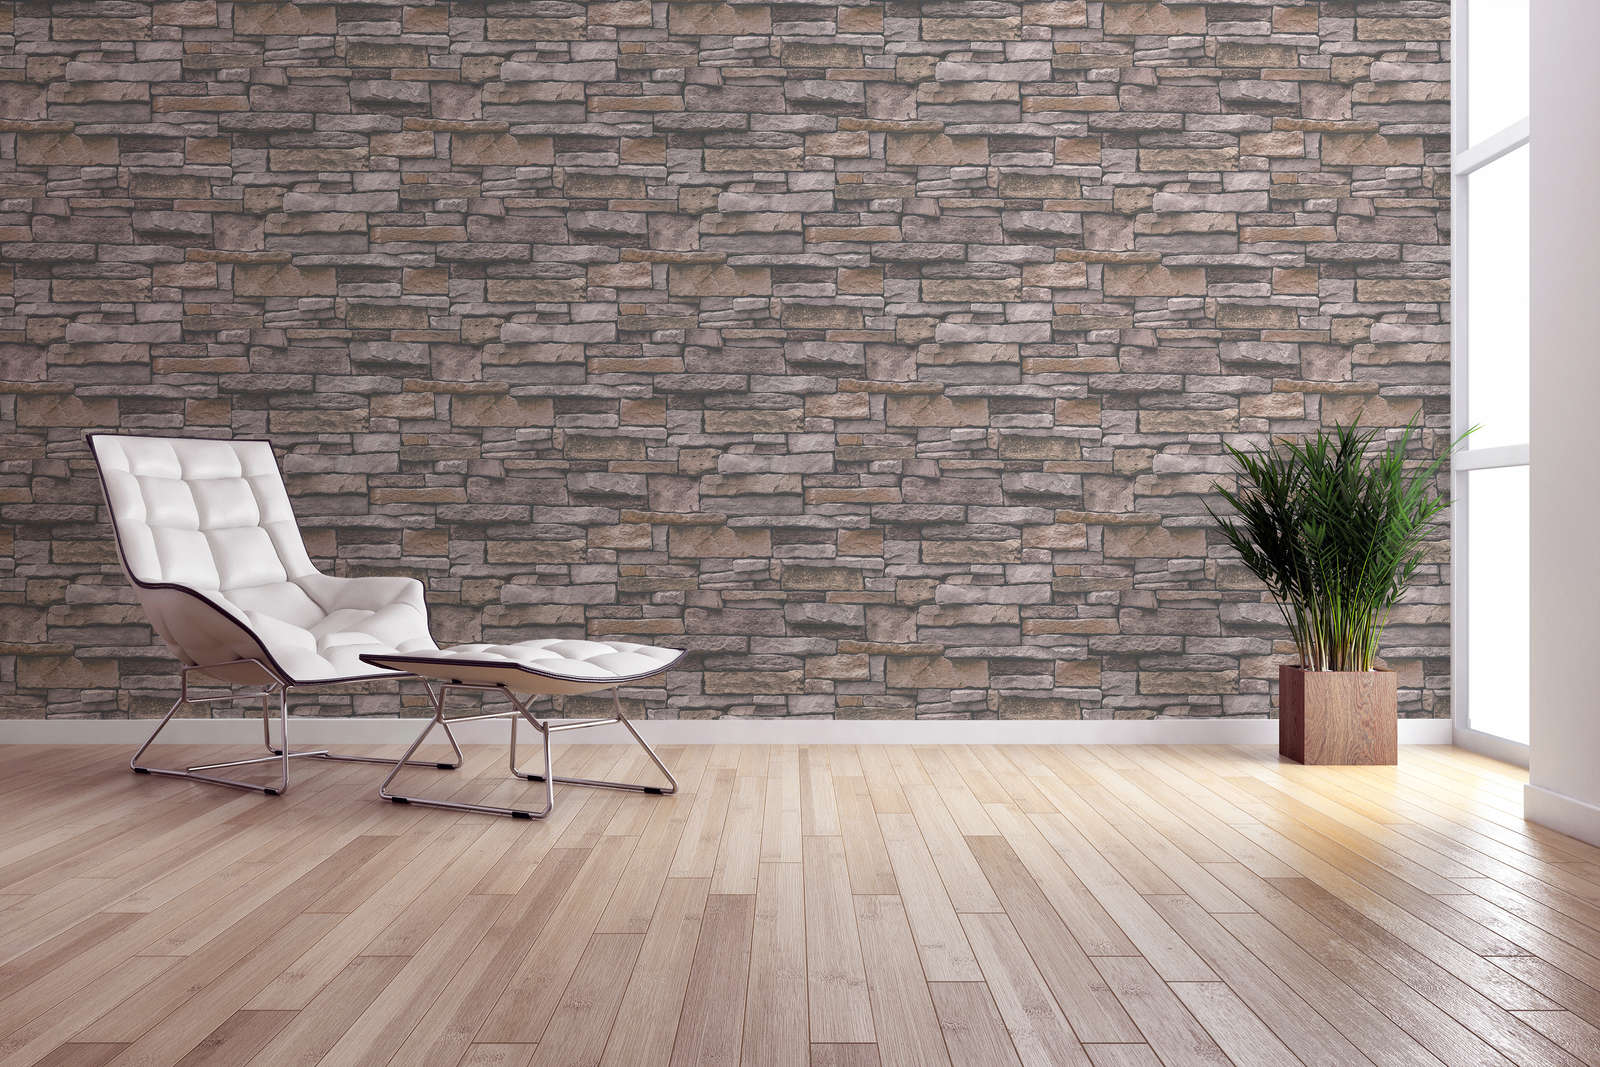             Stone-look non-woven wallpaper with natural stone wall - beige, brown
        